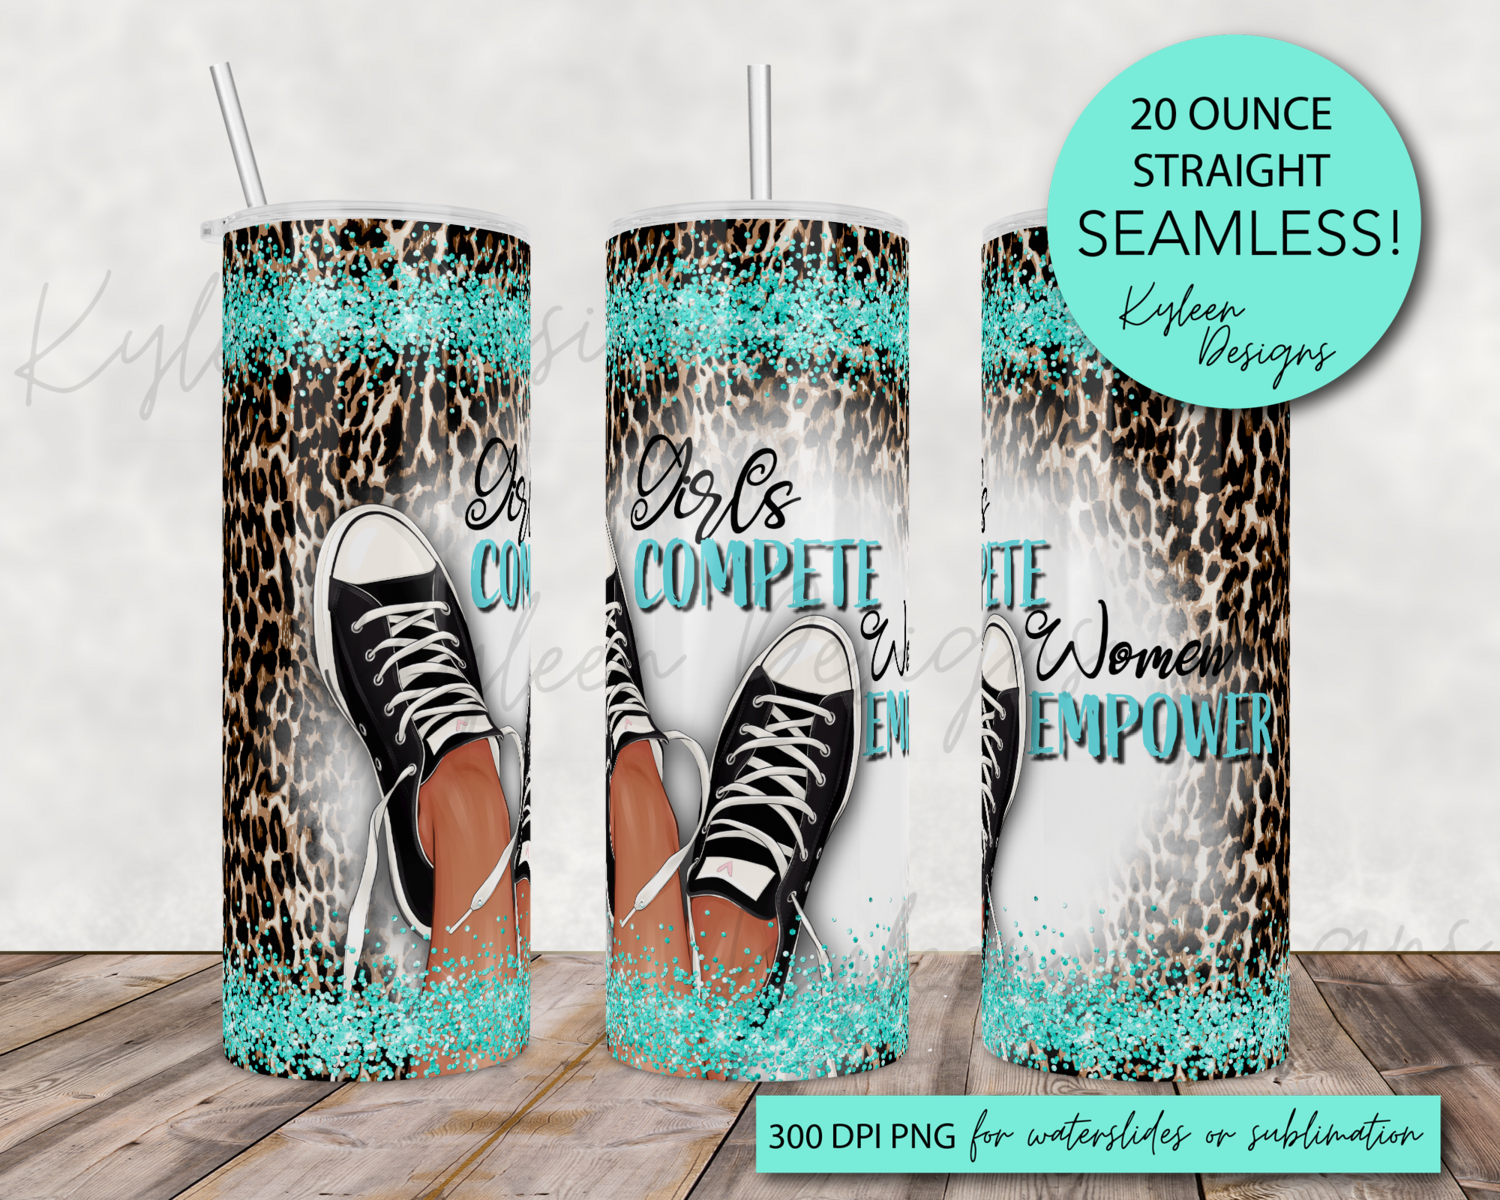 20 ounce girls compete, women empower wrap for sublimation, waterslide High res PNG digital file